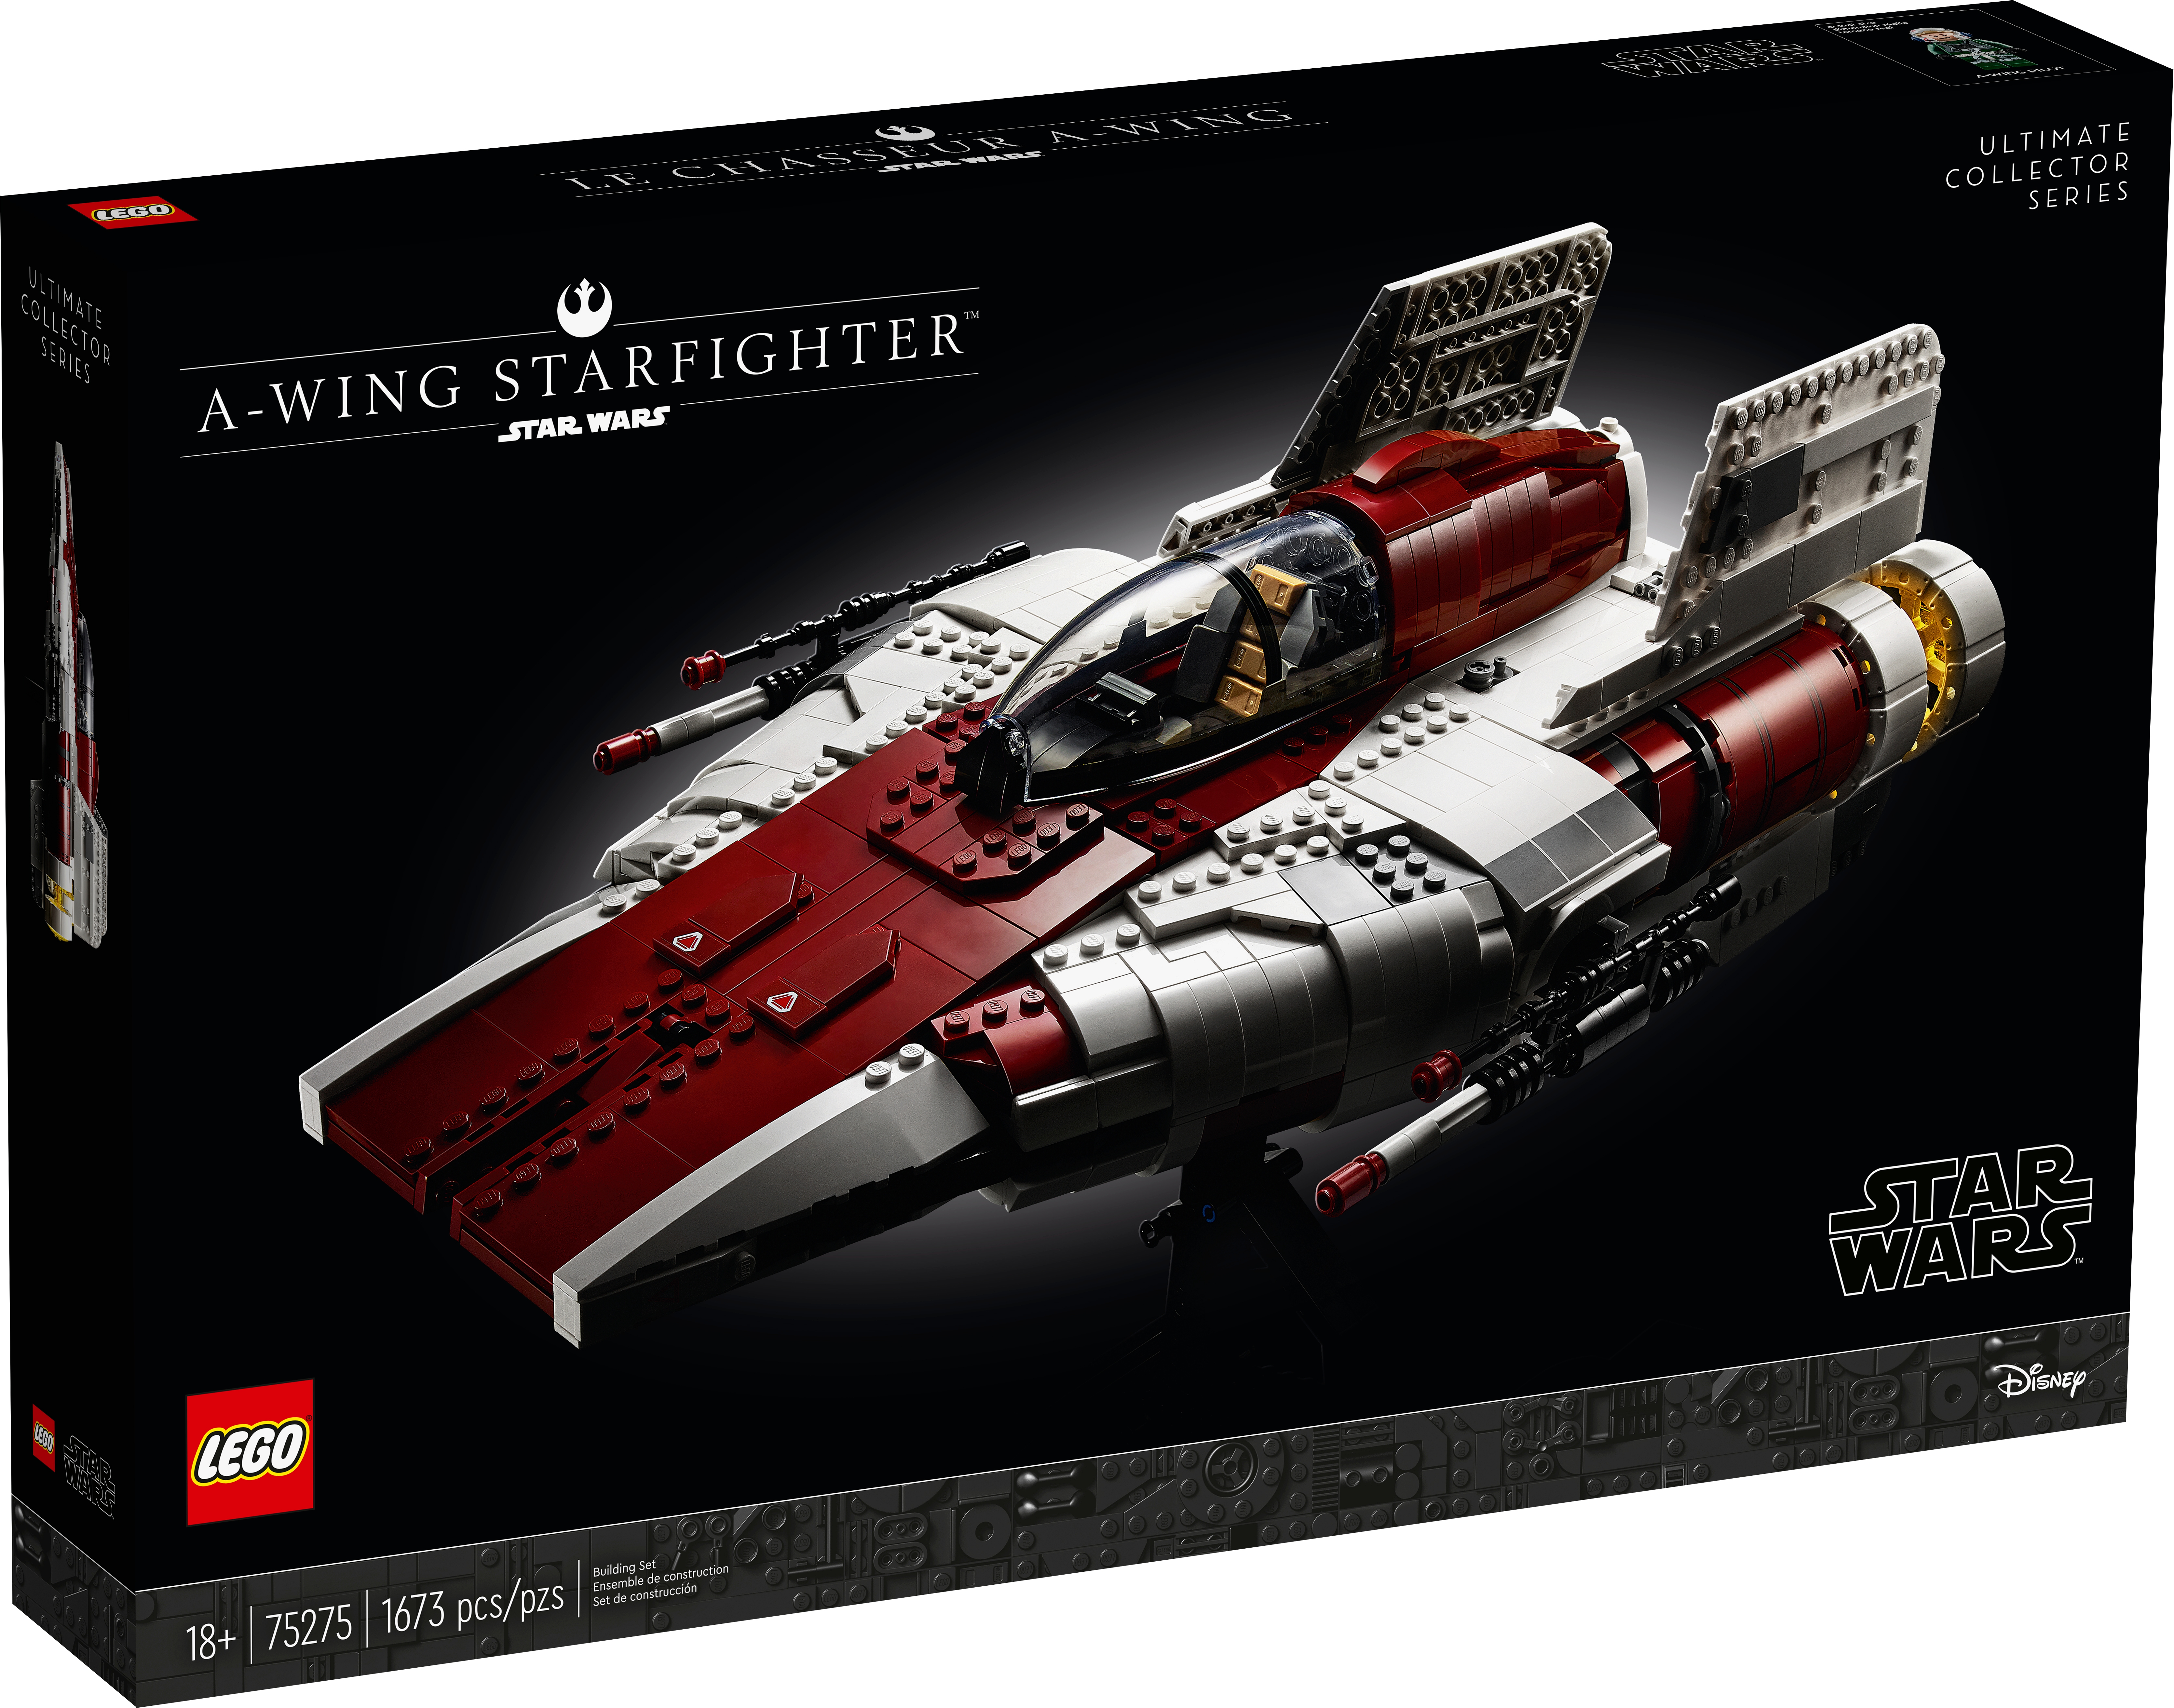 LEGO STAR WARS A-WING STARFIGHTER ULTIMATE COLLECTOR SERIES 75275 IN HAND